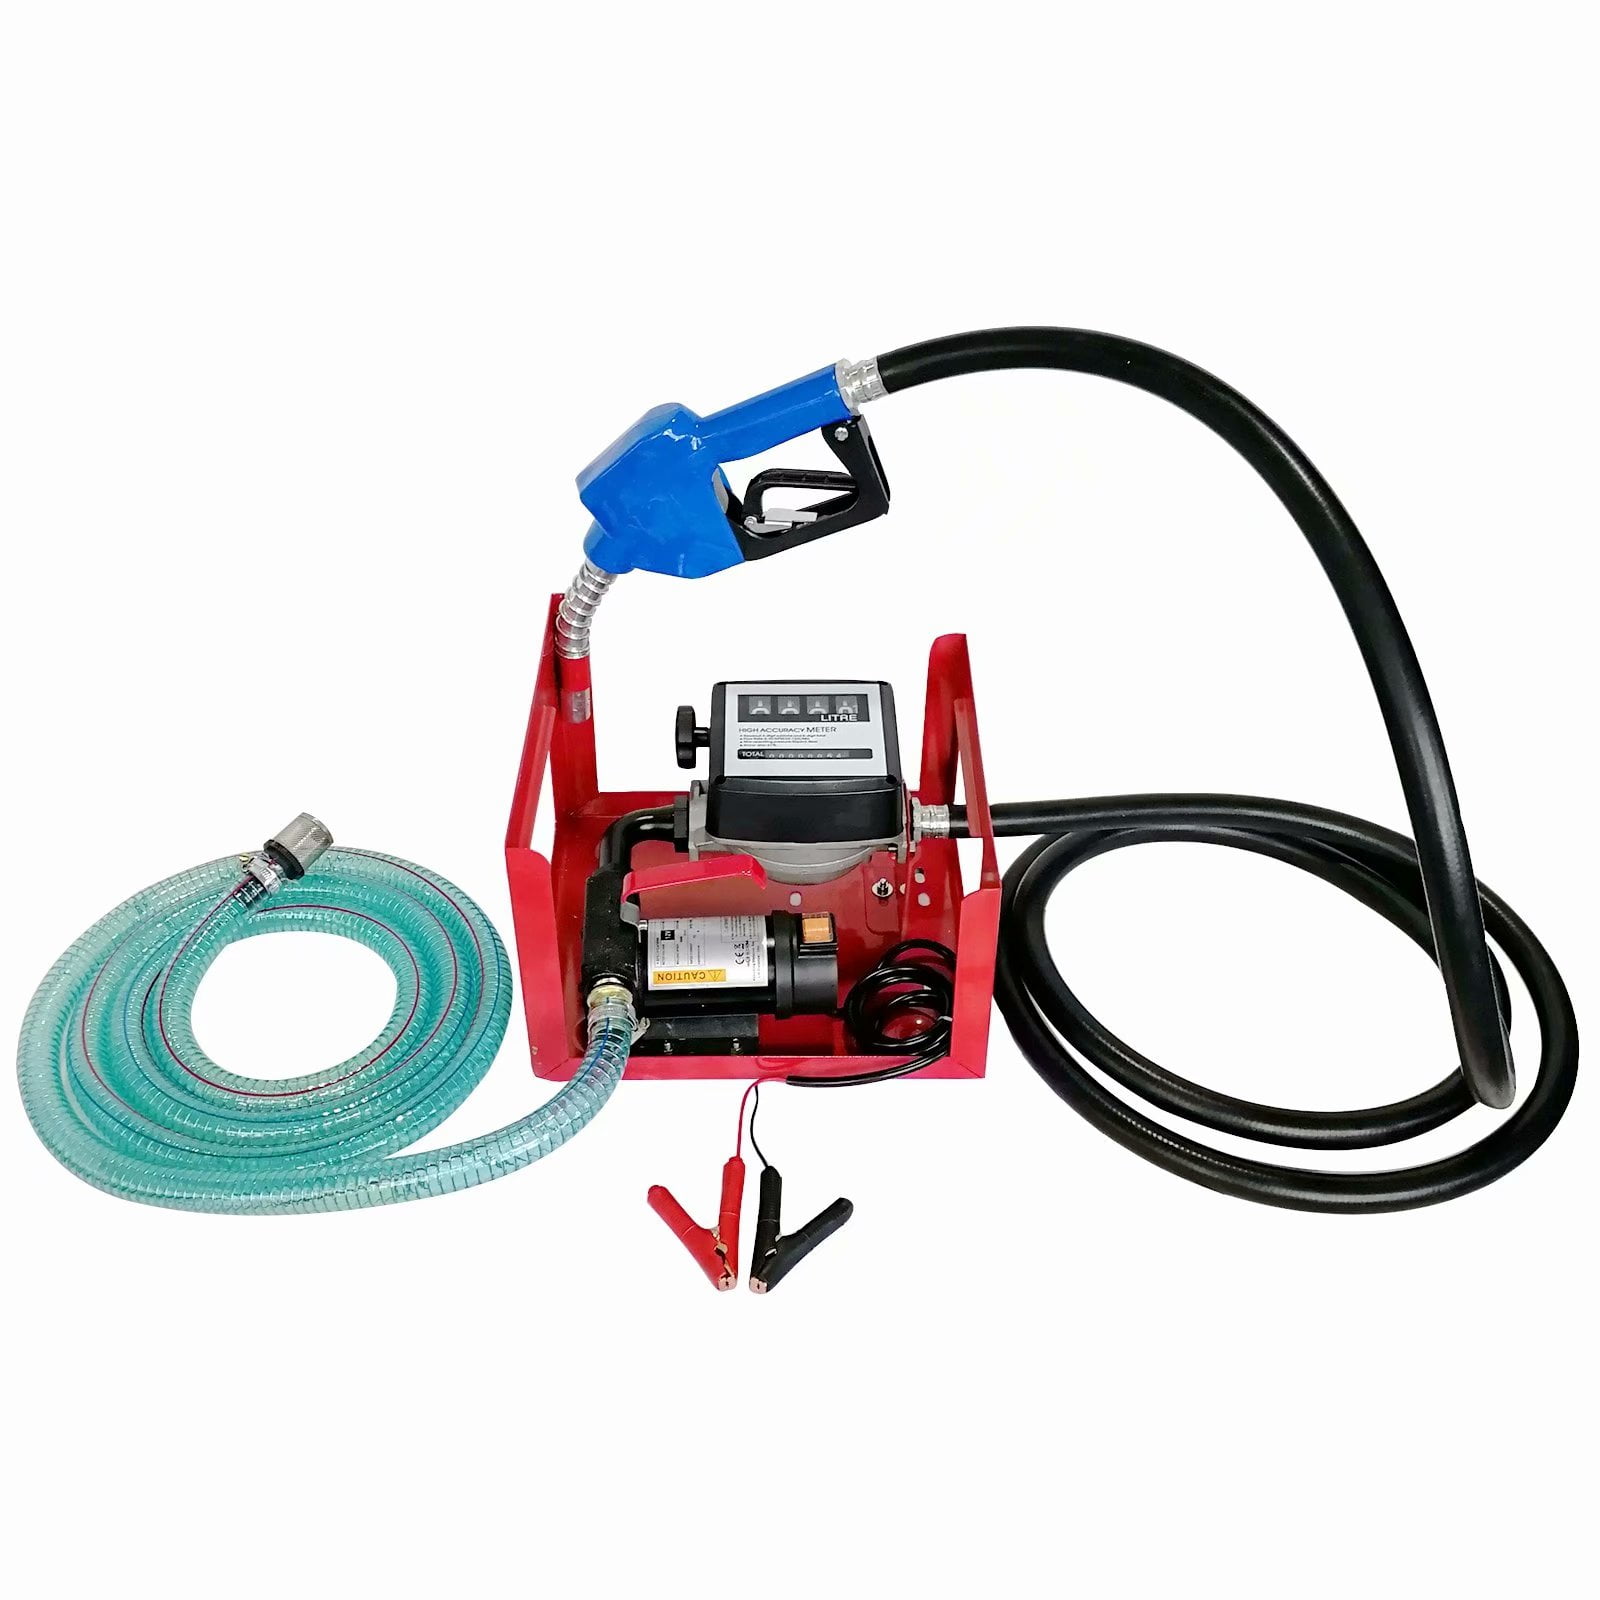 12V DC 155W Electric Fuel Transfer Pump w/ Hose Nozzle and Mechanical fuel meter 